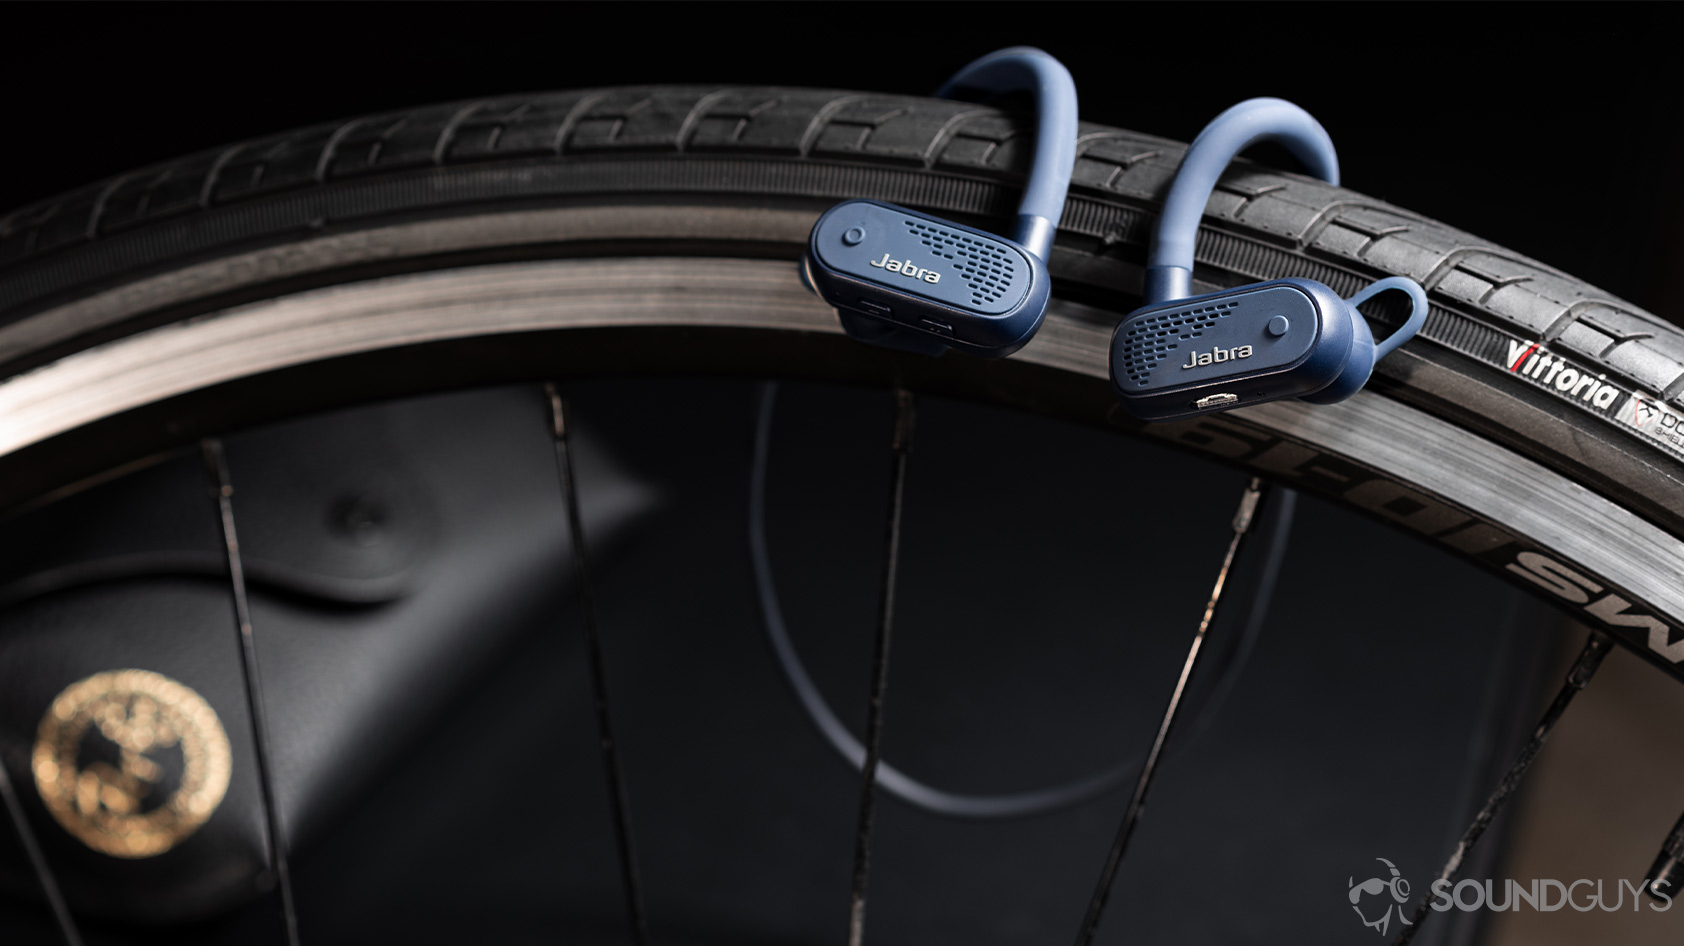 The Jabra Elite Active 45e earbuds hanging on a road bike tire.